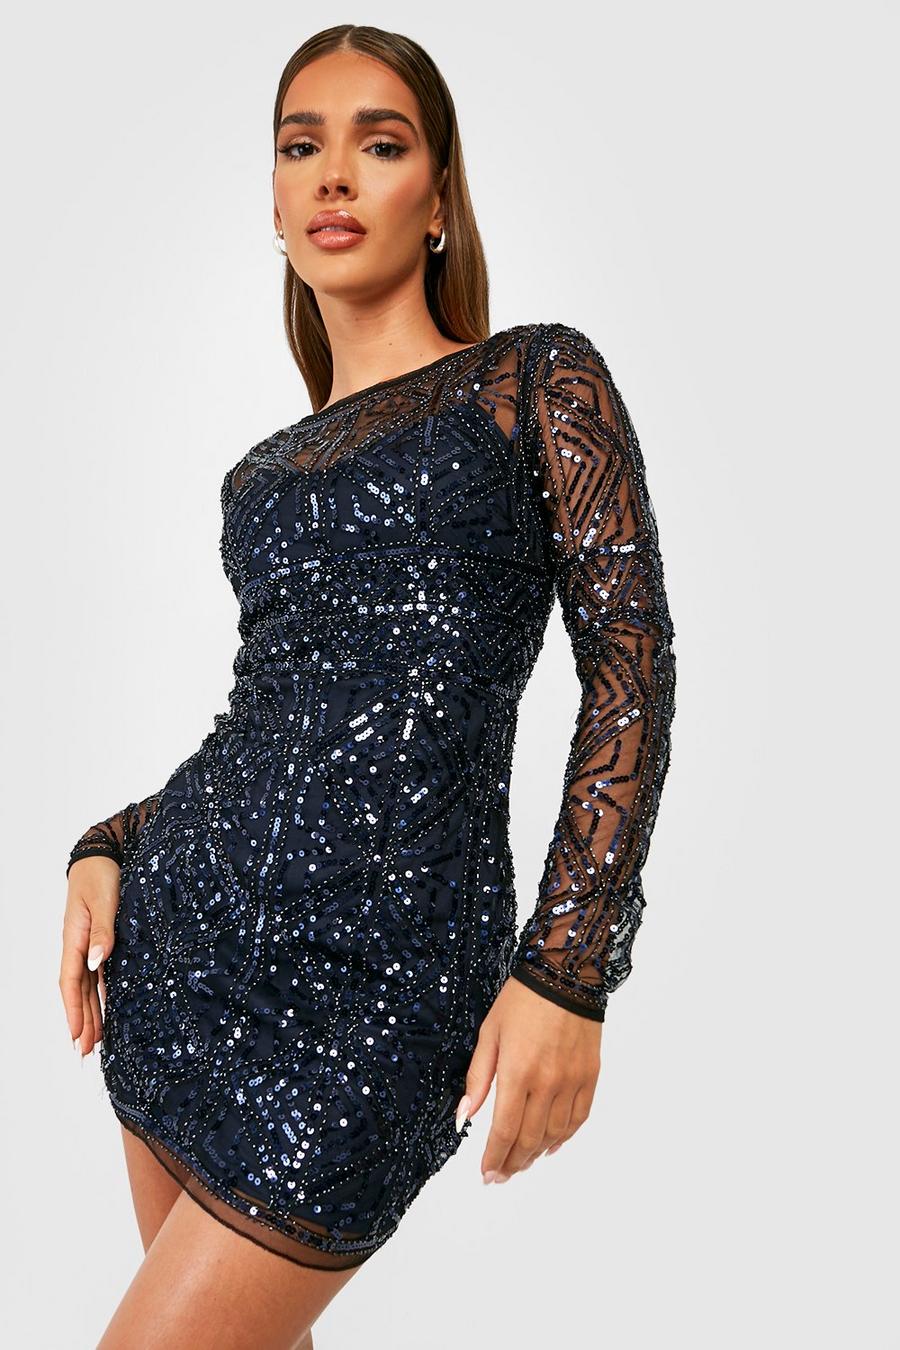 Cobalt azzurro Boutique Embellished Bodycon Party Dress